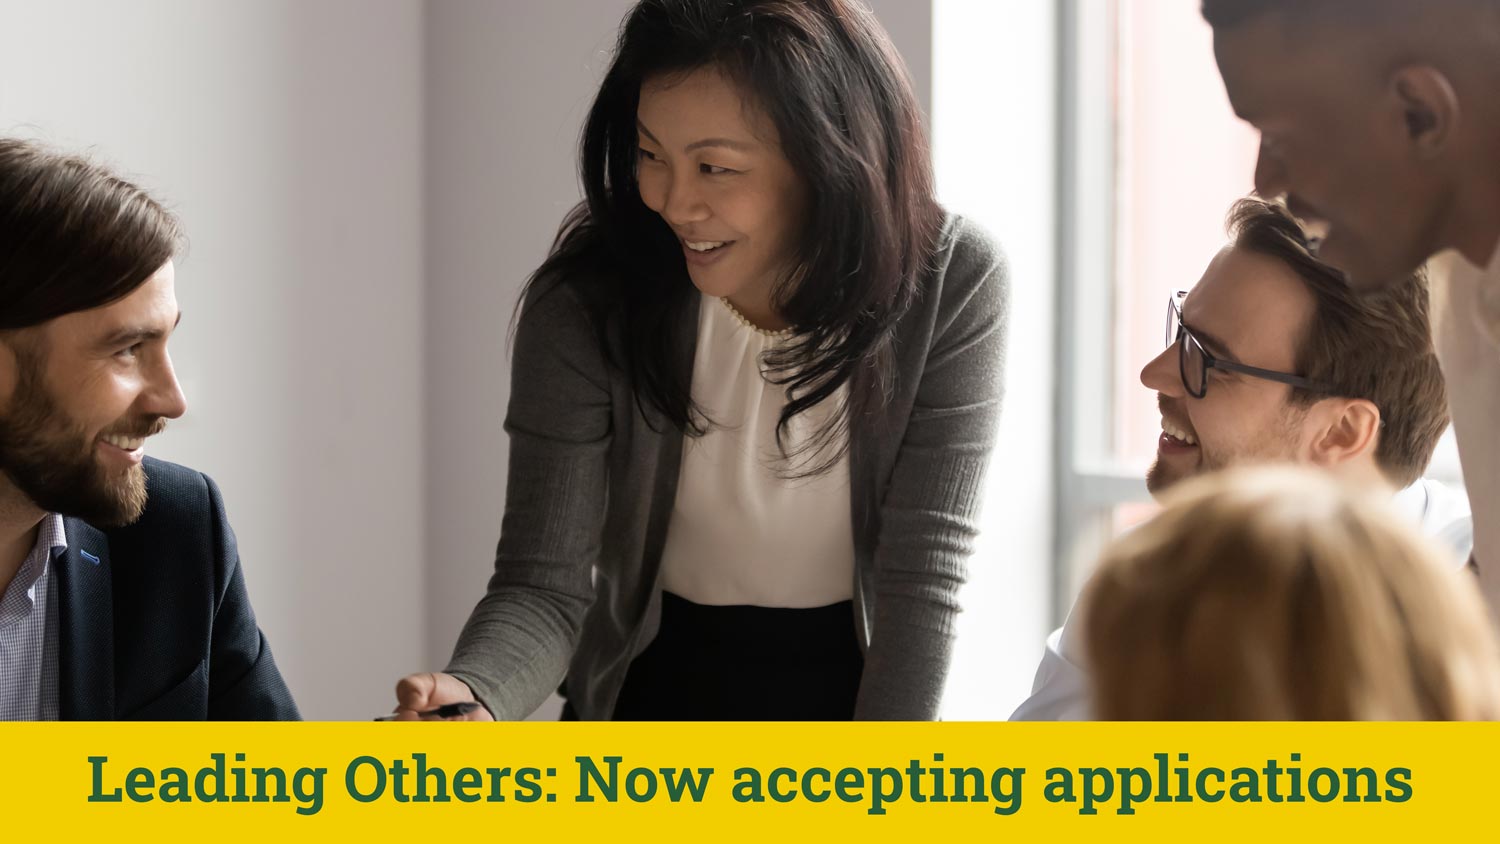 Leading Others: Now accepting applications